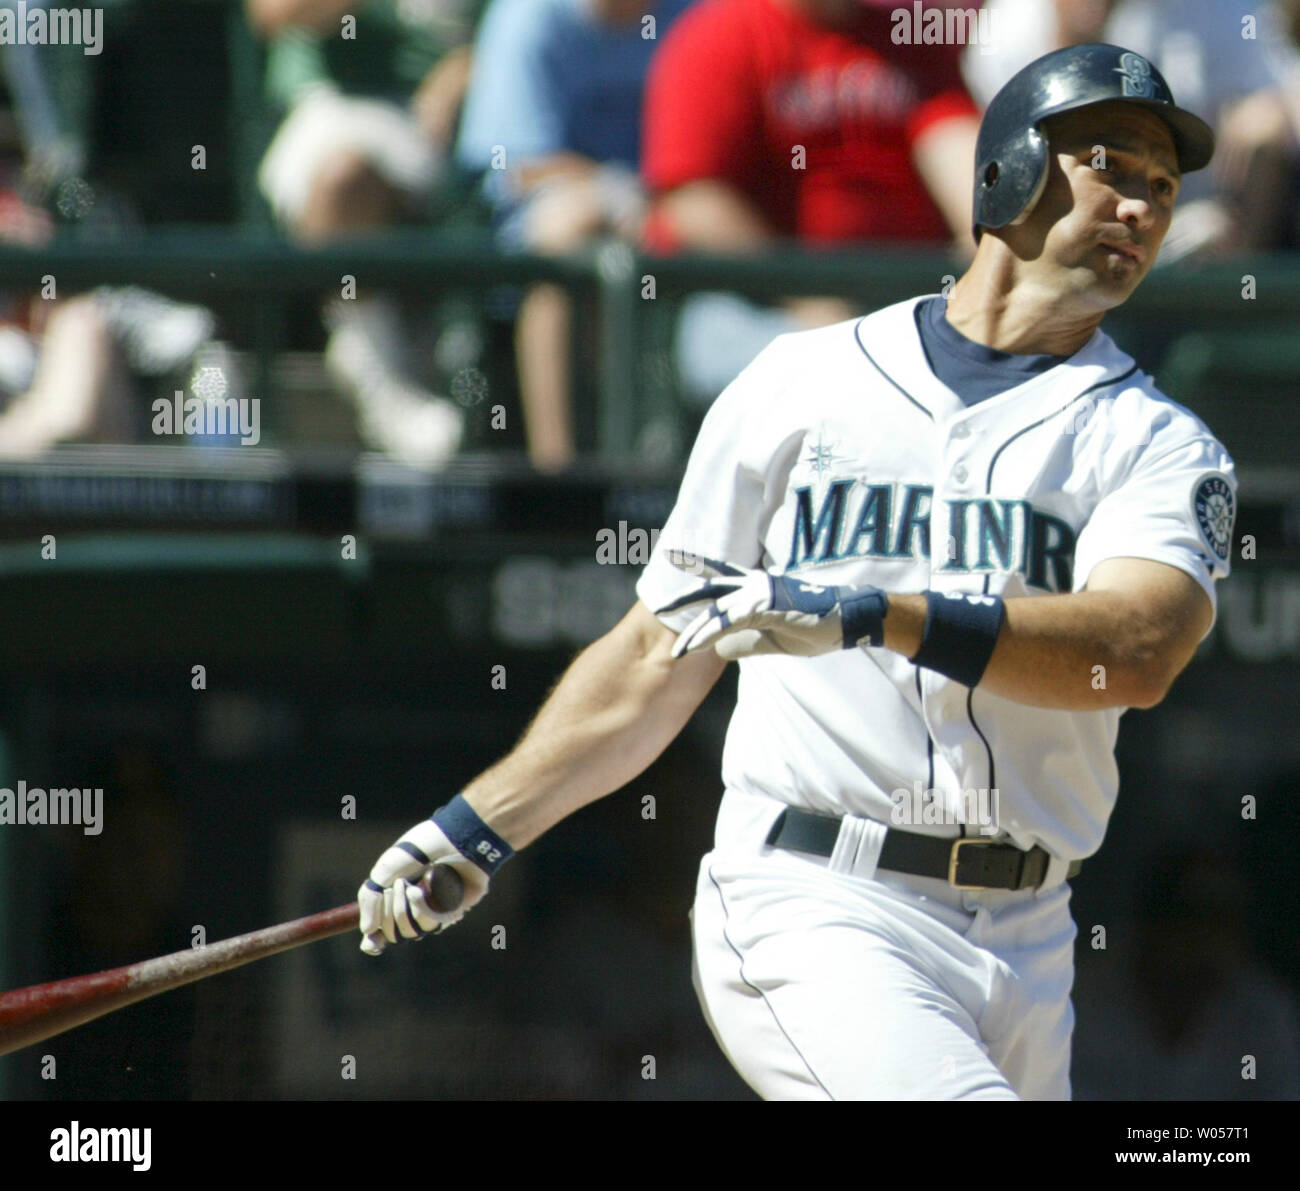 Raul Ibanez's two HR, six RBI lead Mariners' rout of Yankees